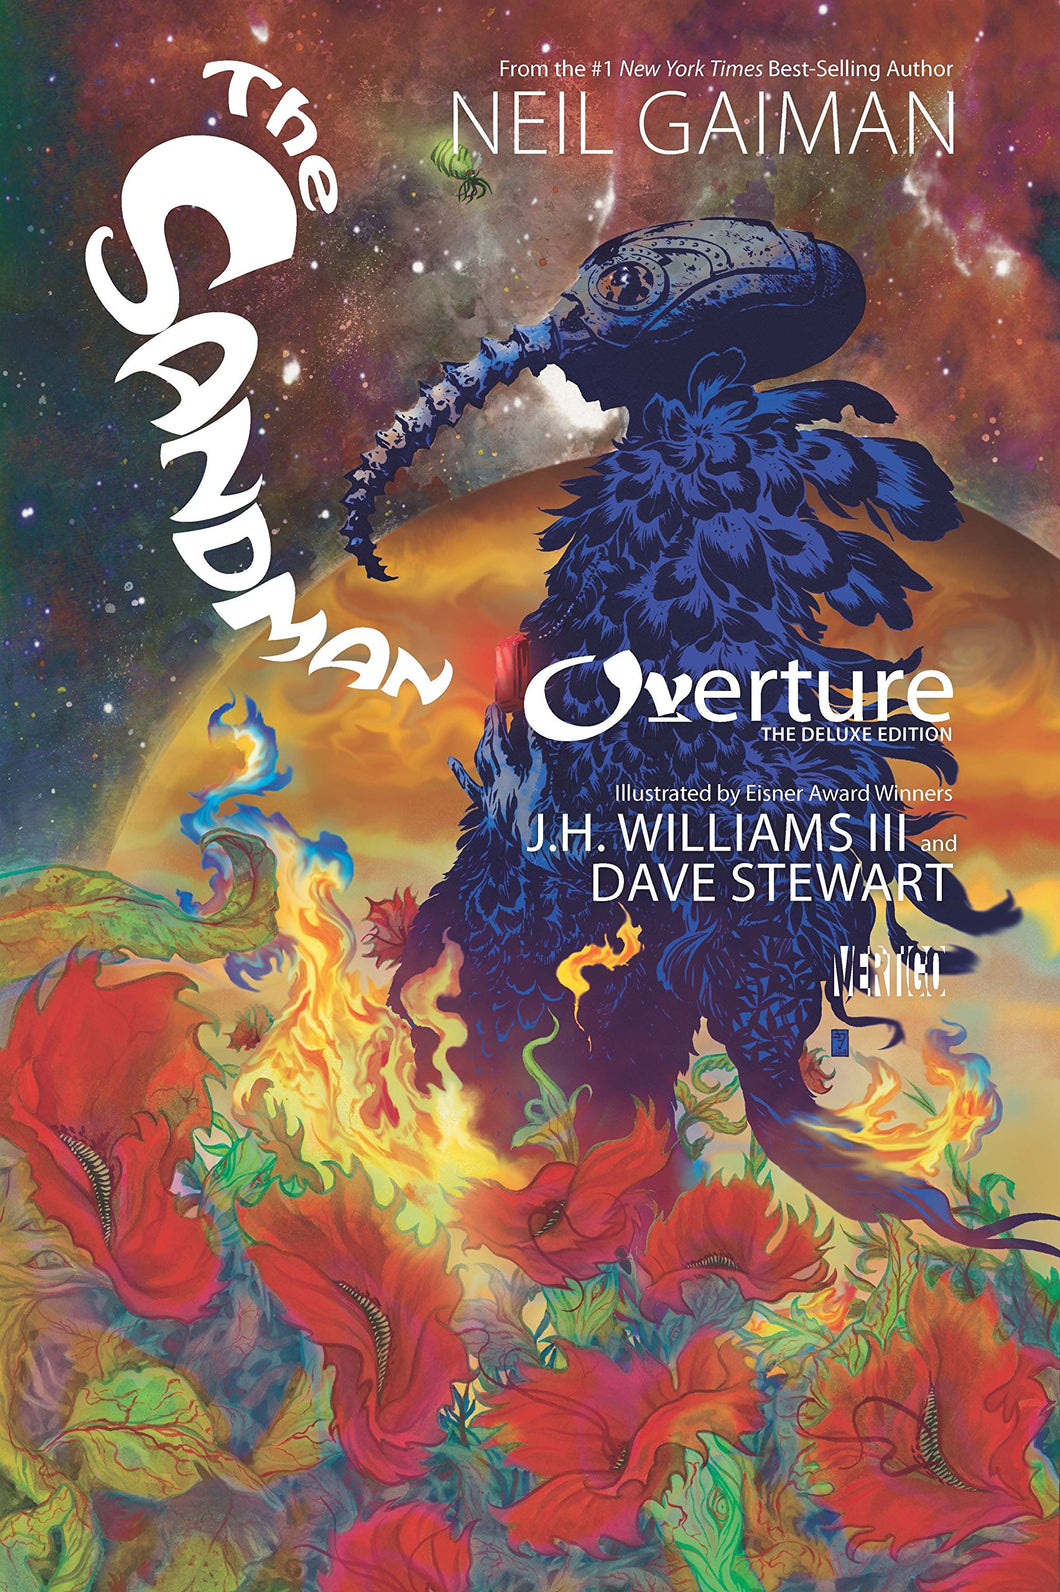 The Sandman: Overture (Deluxe Edition) by Neil Gaiman and J.H. Williams III